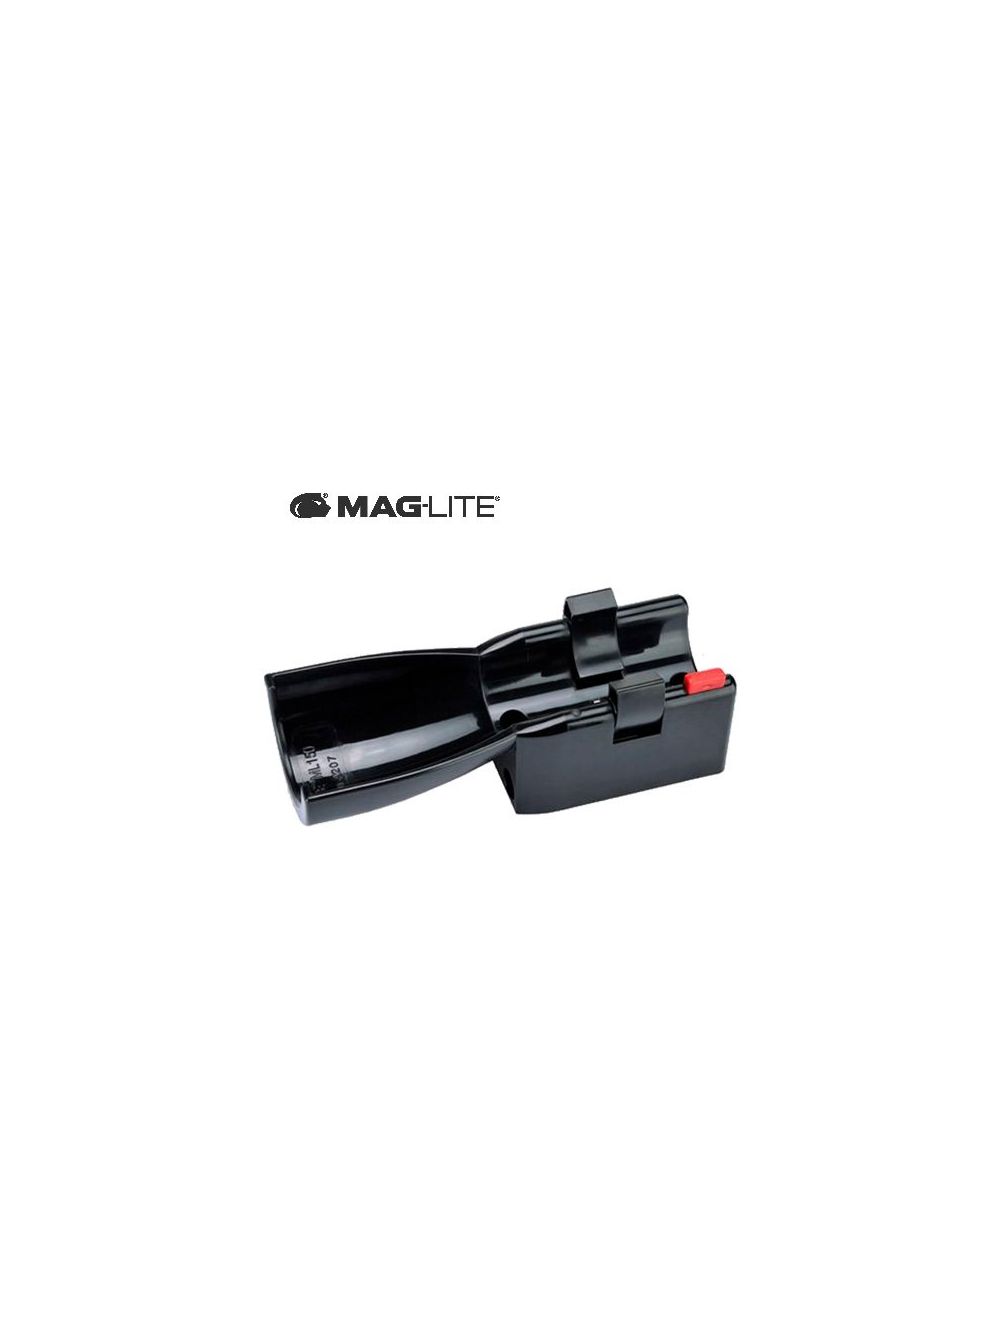 Maglite ML150LR RECHARGEABLE ACC/CHARGER Charging Cradle Tactical Gear Australia Supplier Distributor Dealer